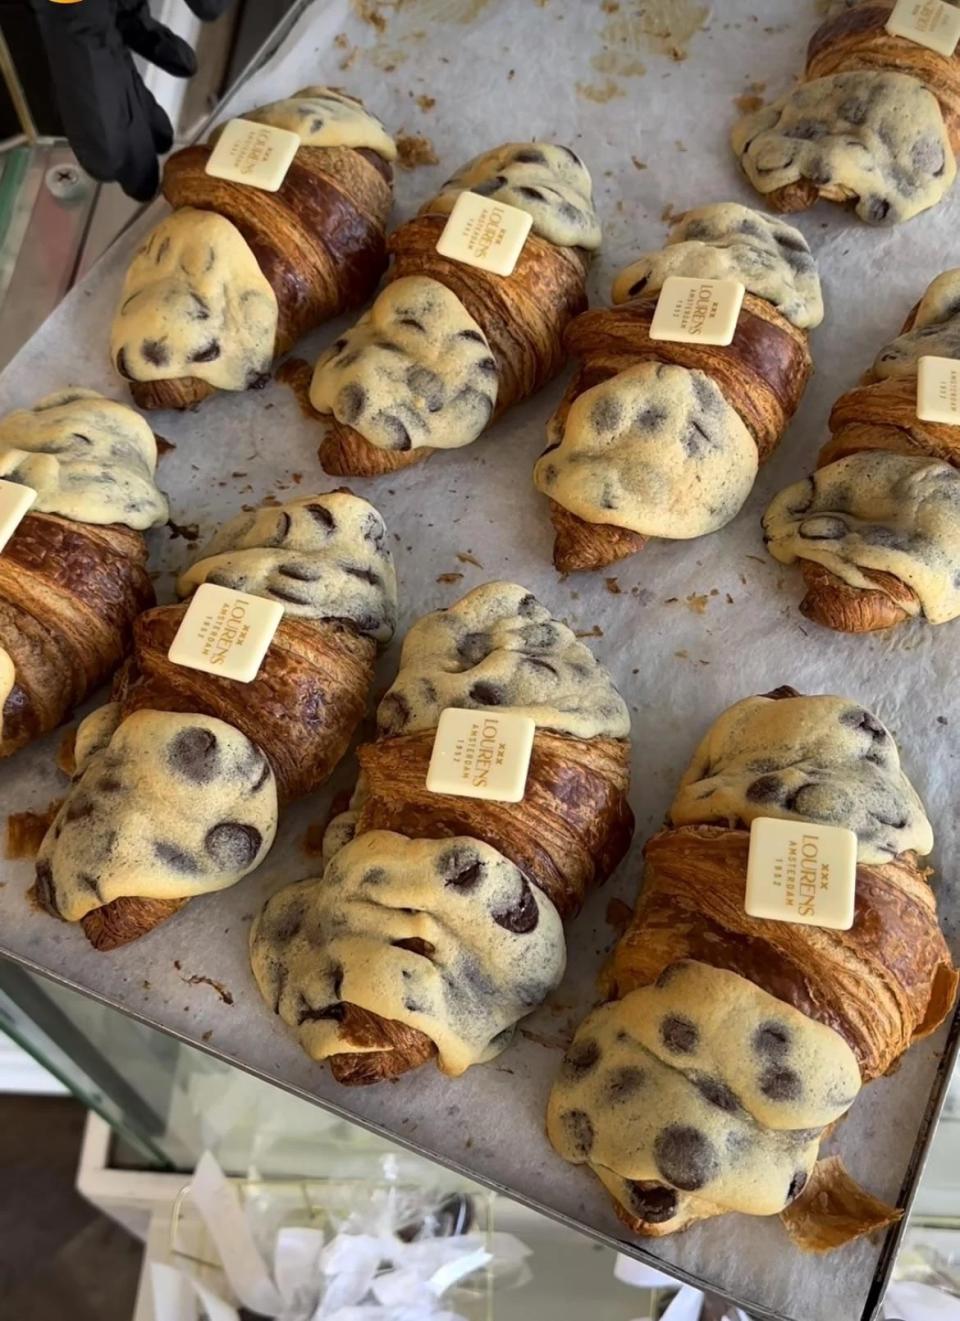 Various croissants with toppings on a tray in a bakery display.  Some have a chocolate chip coating